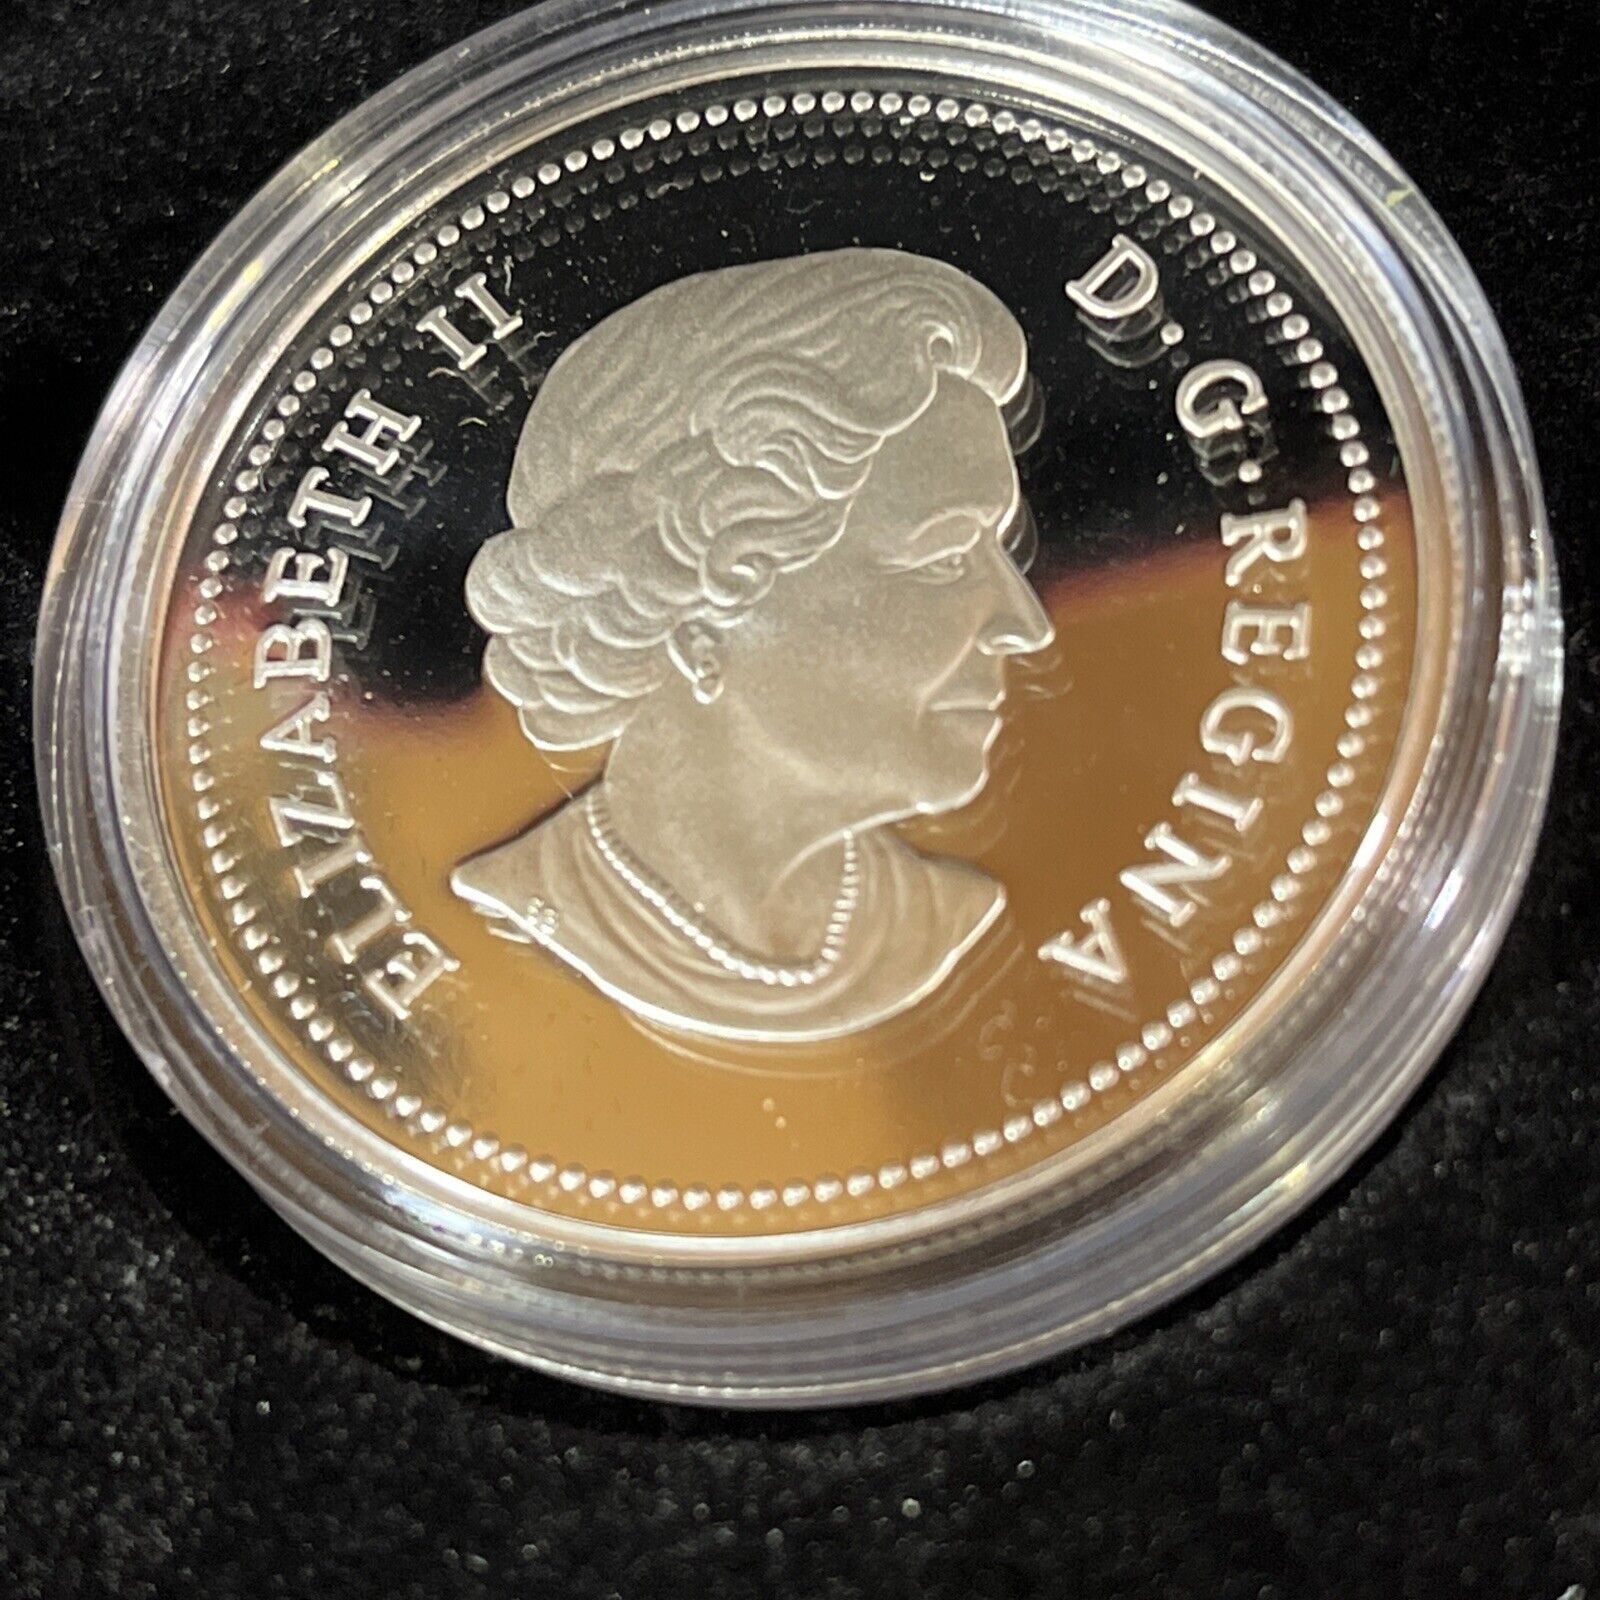 2004 Canada Special Edition Proof Silver Dollar - The Poppy